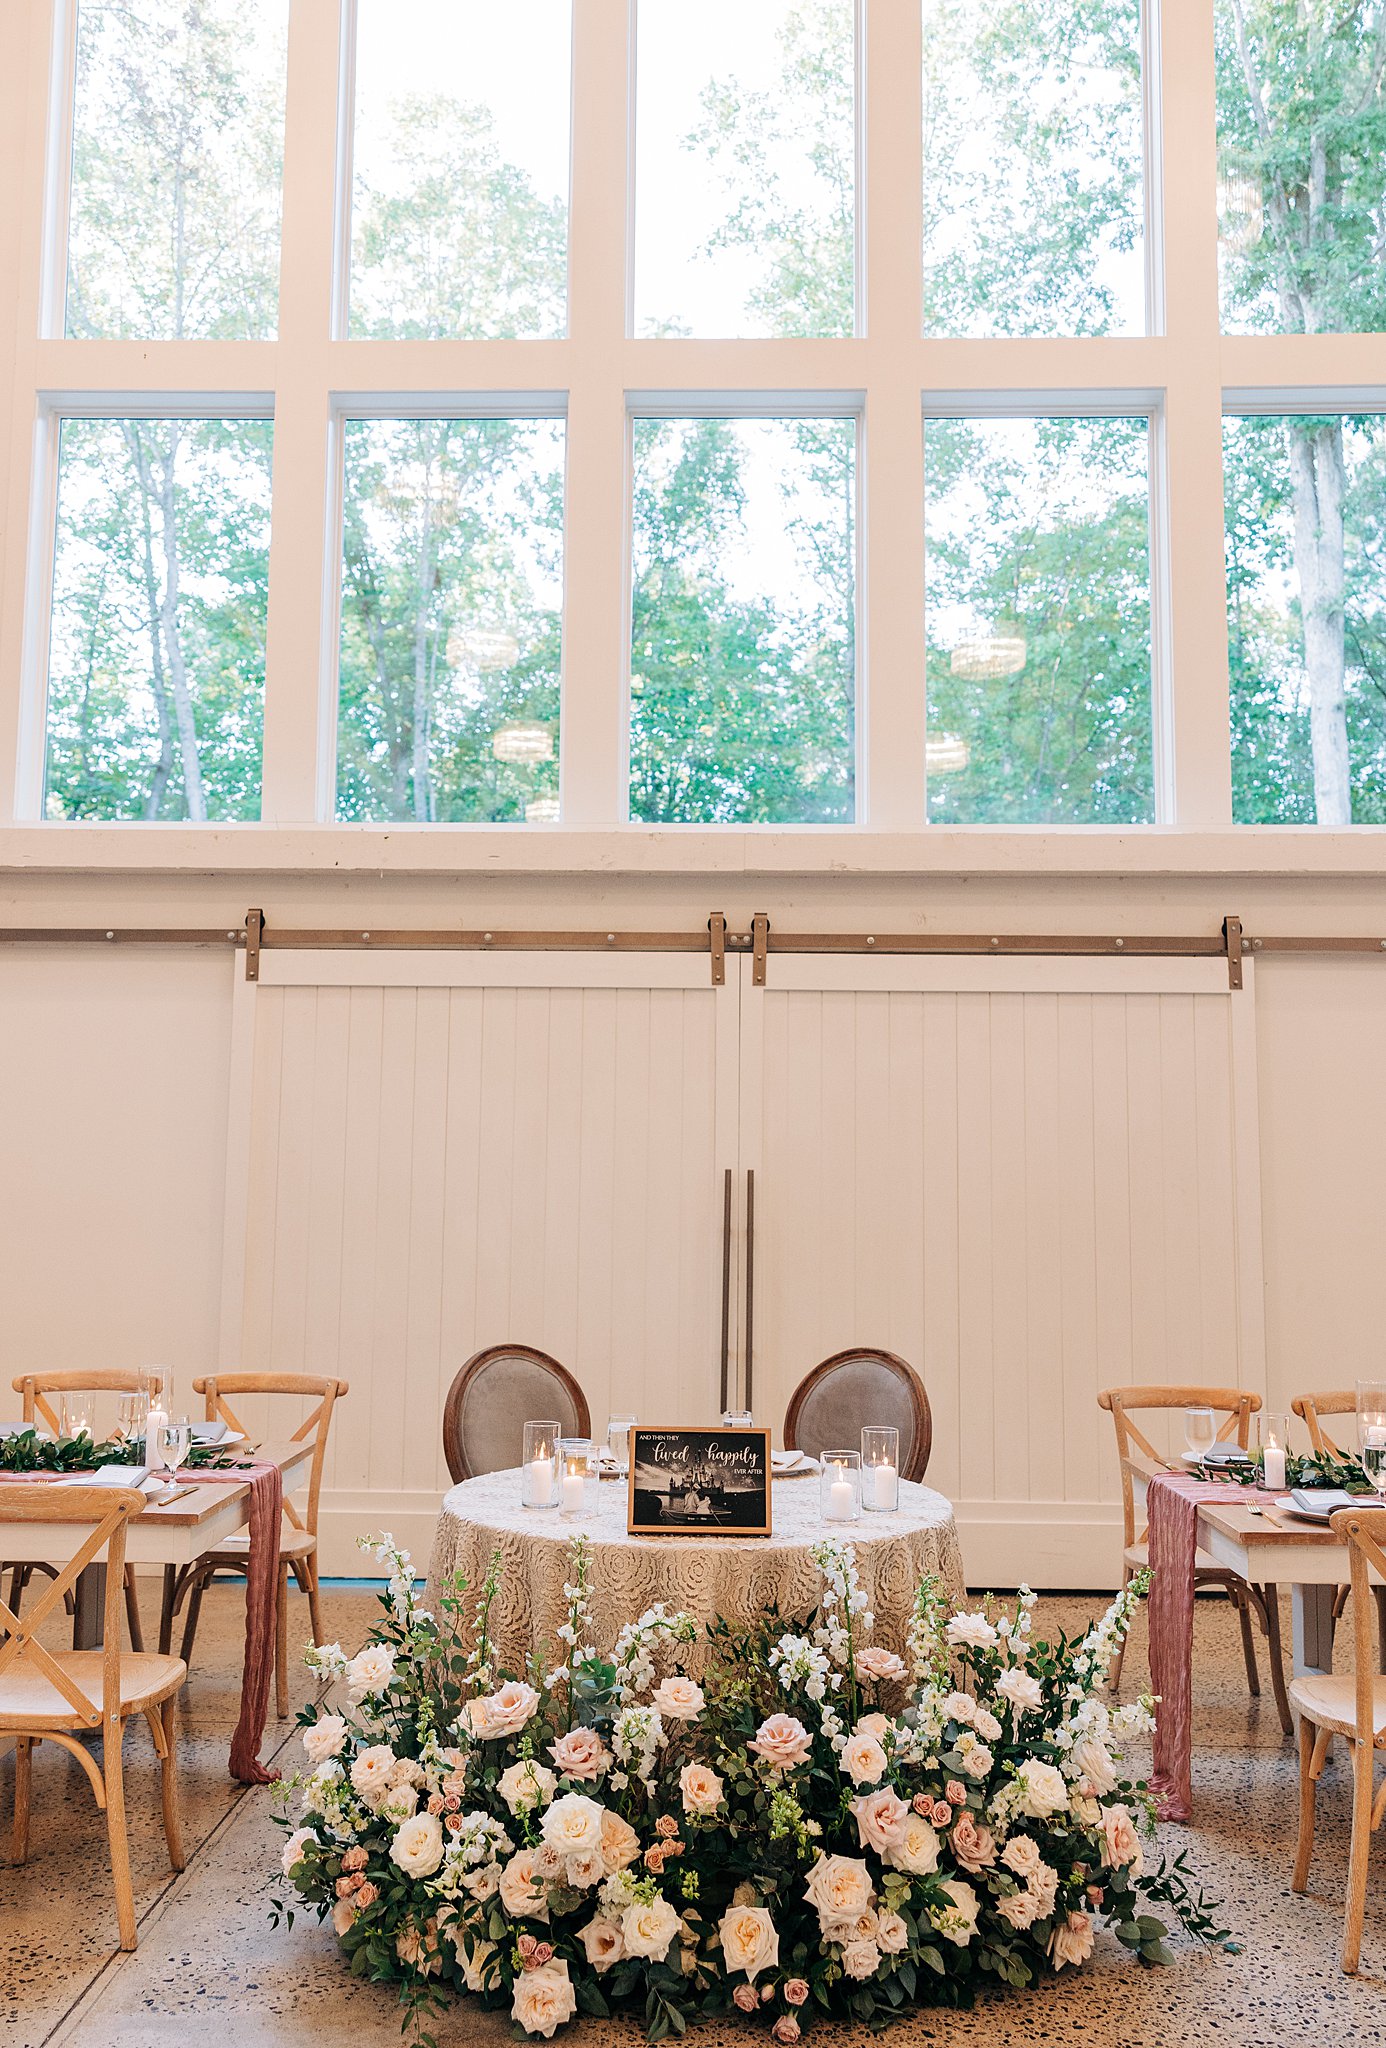 Details of the newlywed's head table with a large floral arrangement at the carolina grove wedding venue